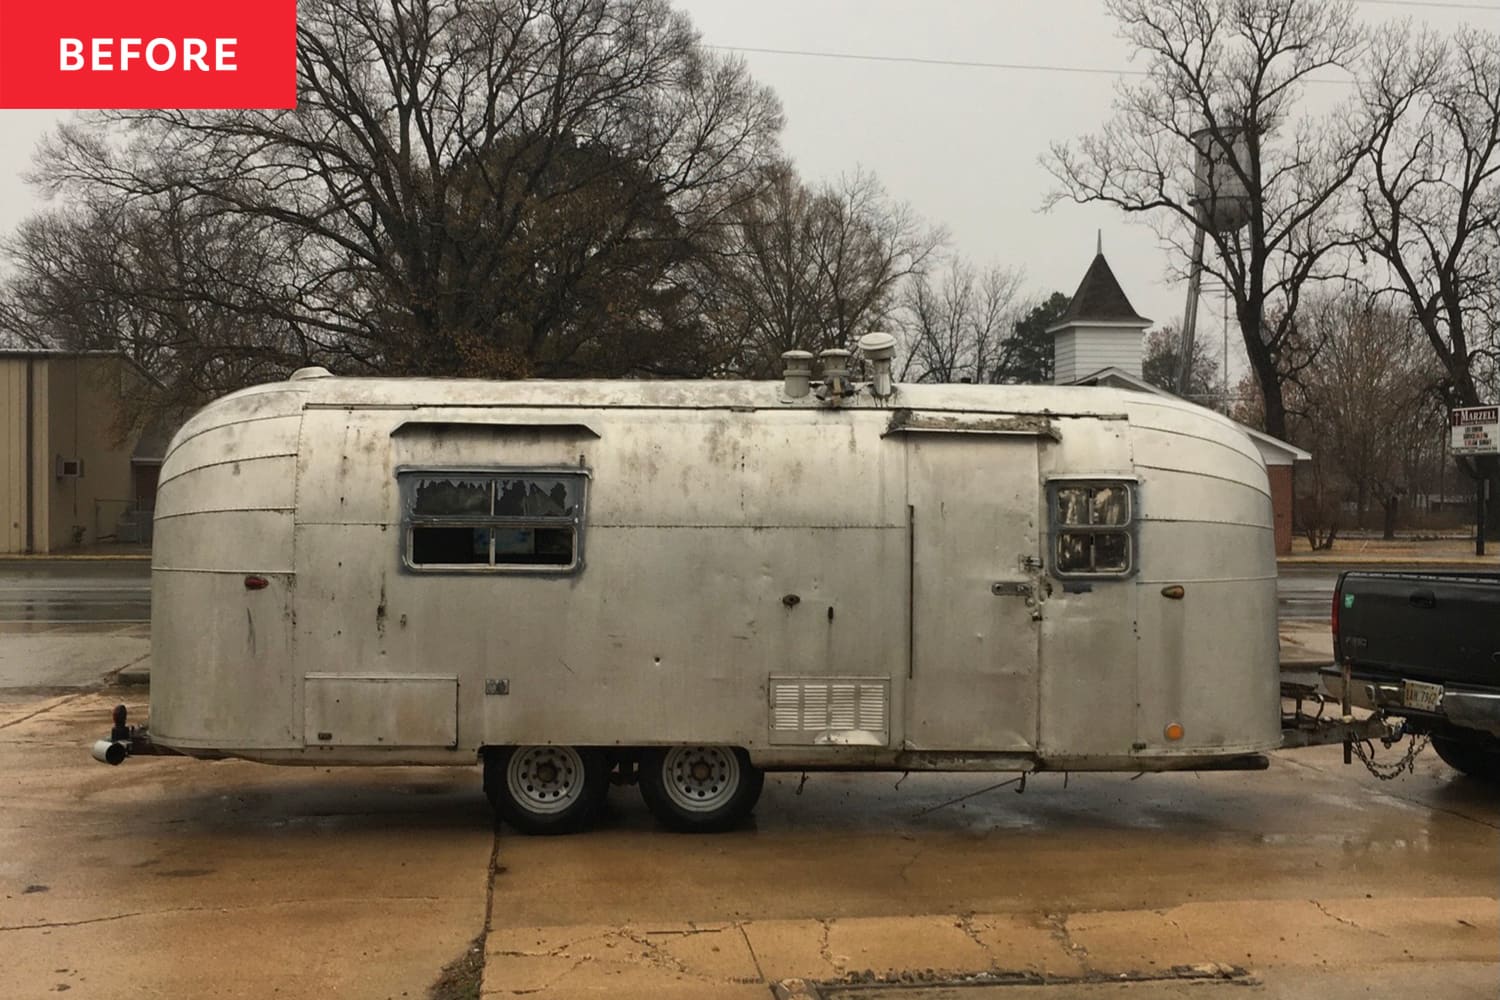 Before and After: A Falling Apart 1960s Avion Holiday Trailer Gets a Groovy Retro-Inspired Redo